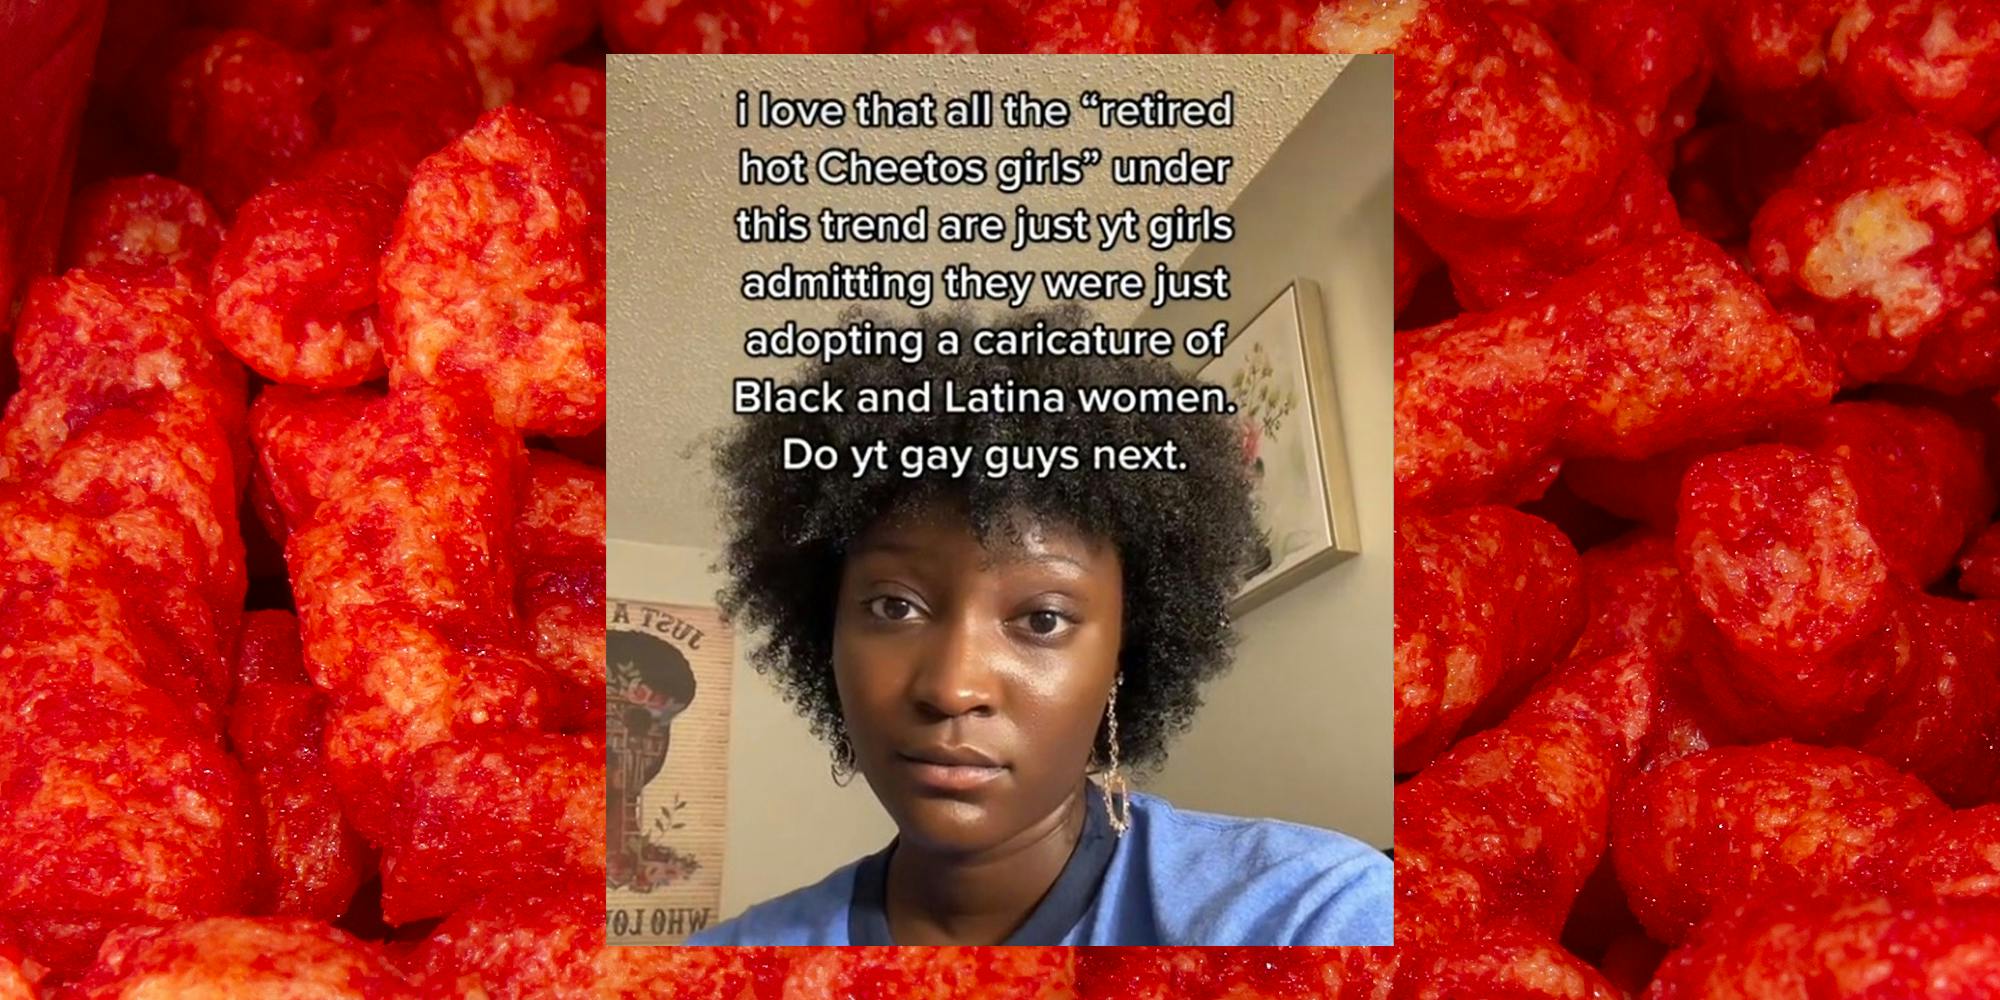 woman with caption 'i love that all the 'retired hot Cheetos girls' under this trend are just yt girls admitting they were just adopting a caricature of Black and Latina women. Do yt gay guys next.' over Cheetos background